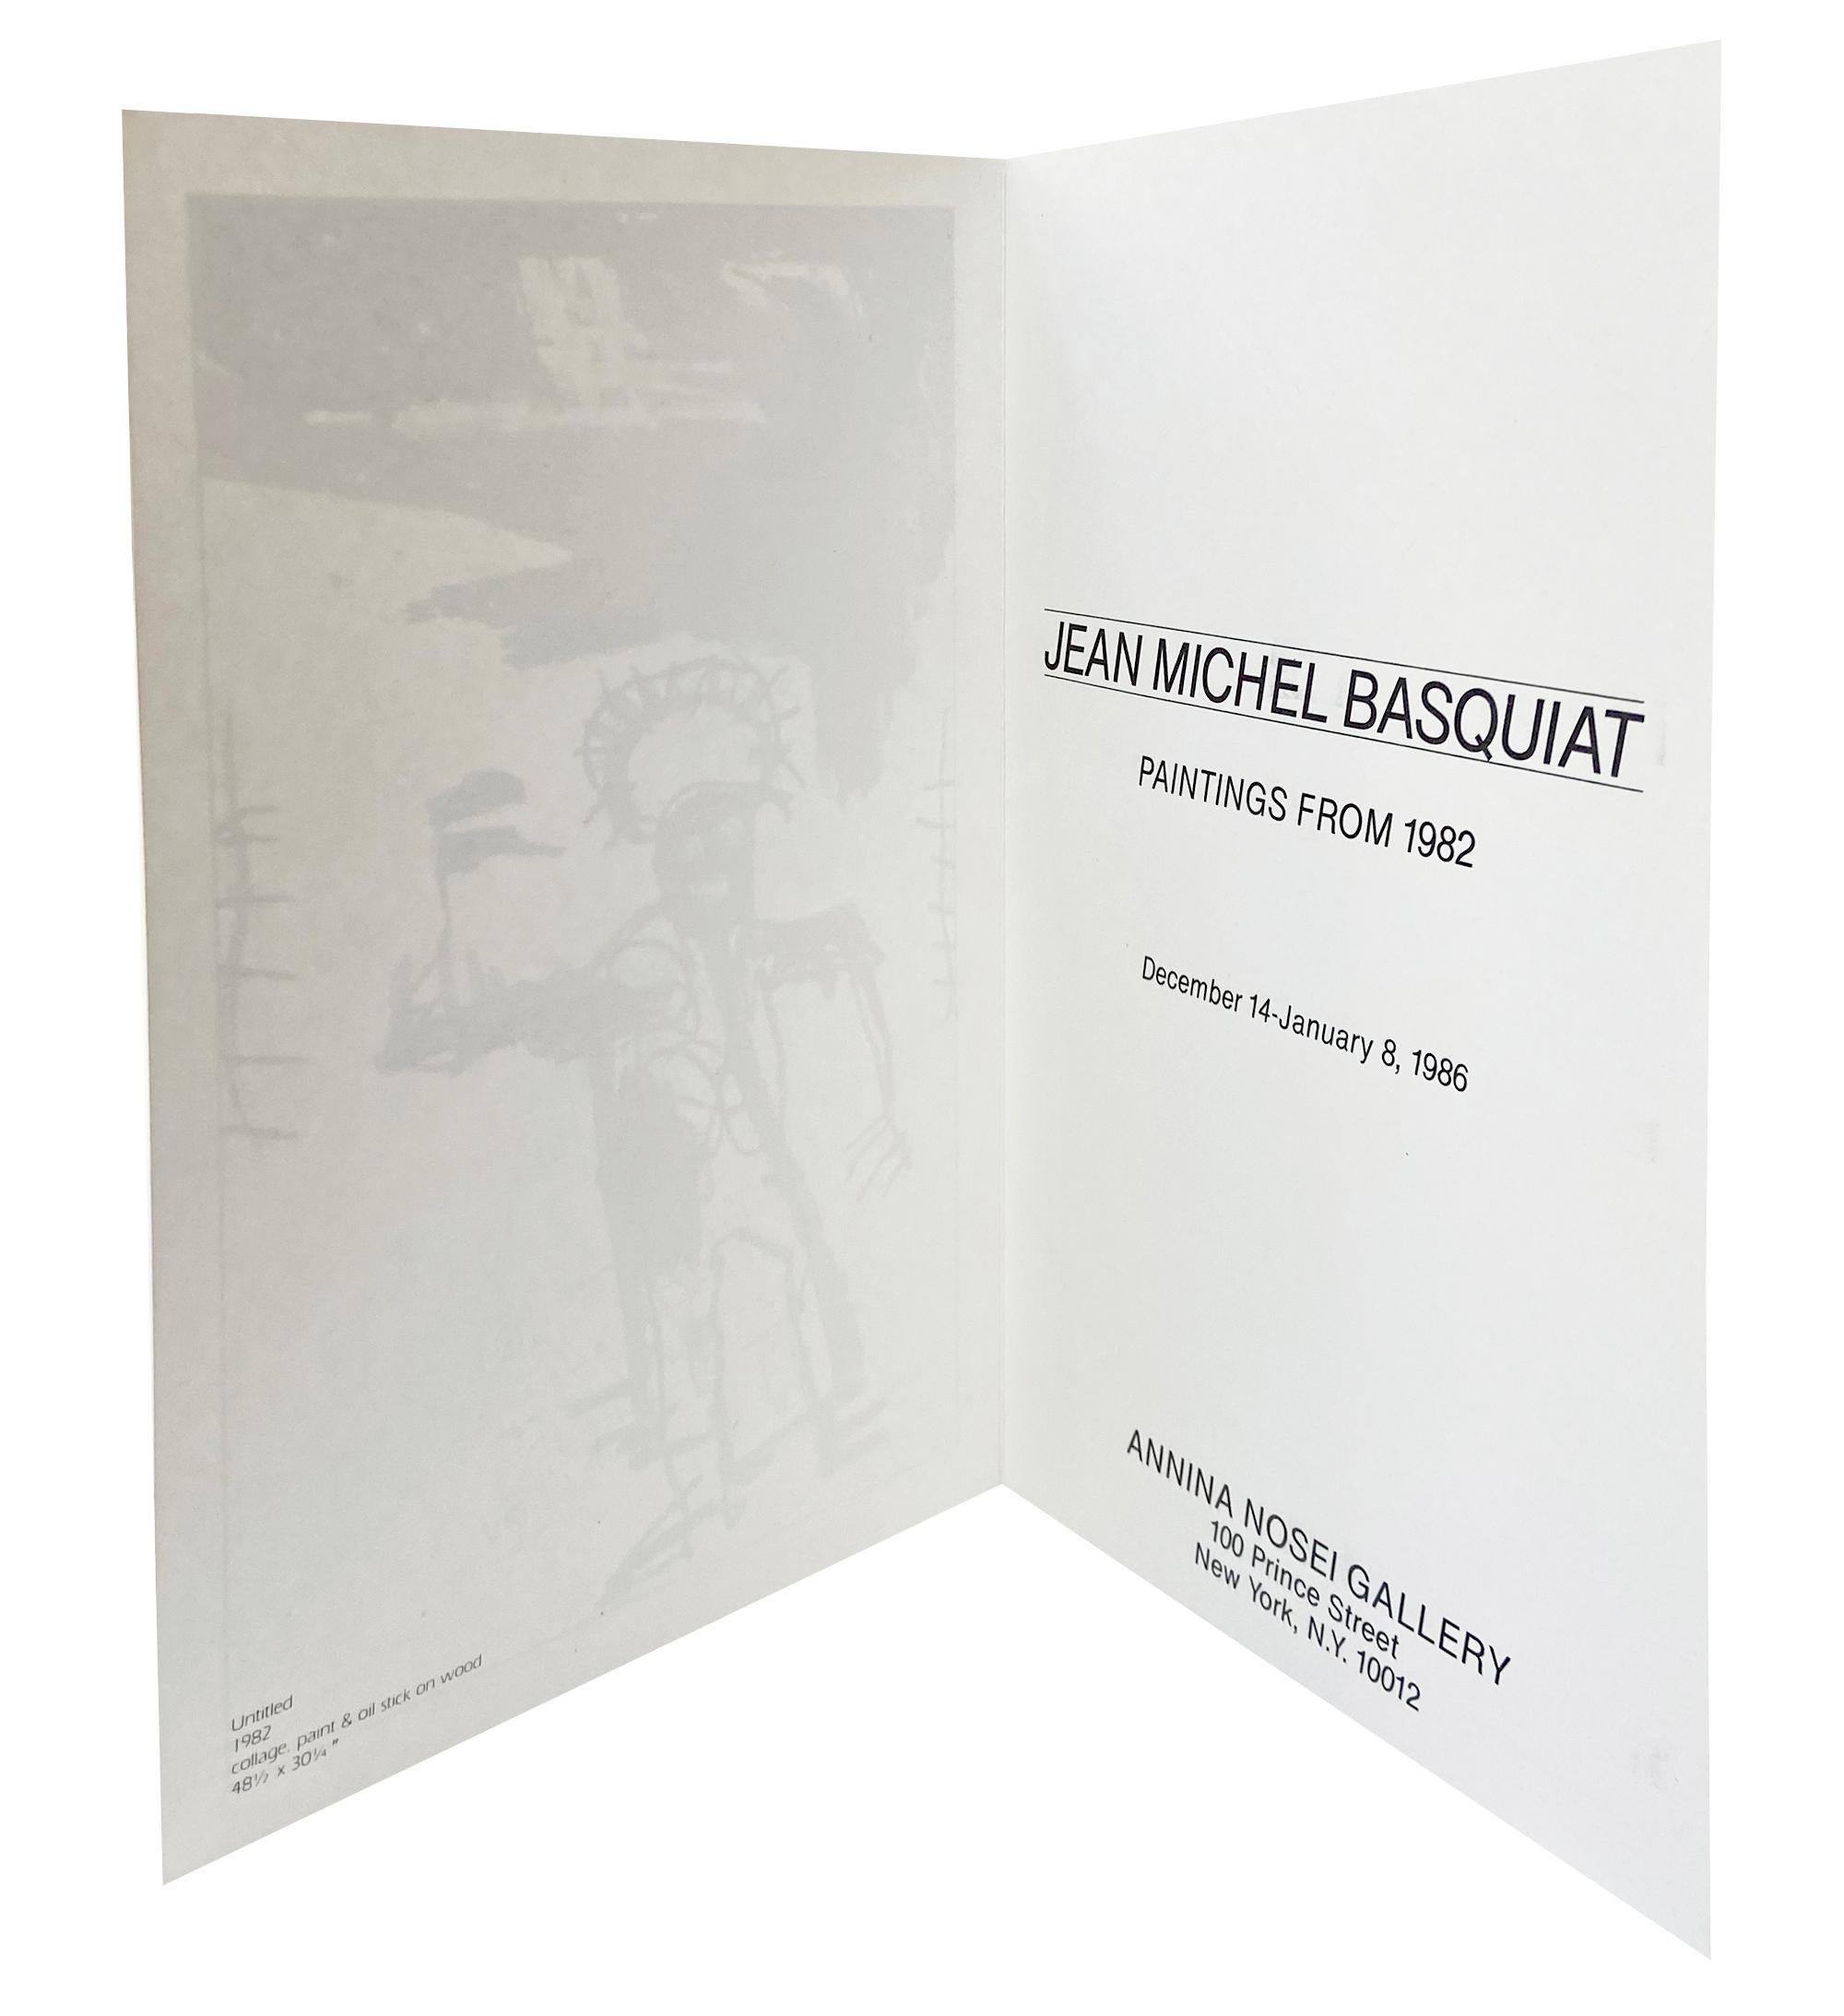 Jean-Michel Basquiat, Annina Nosei Gallery, New York, 1982-1988:
A set of 3 rare vintage original Basquiat announcement cards from 1982, 1986, 1988, respectively - with 2 published during Basquiat’s lifetime on the occasion(s) of:  

- ‘Basquiat